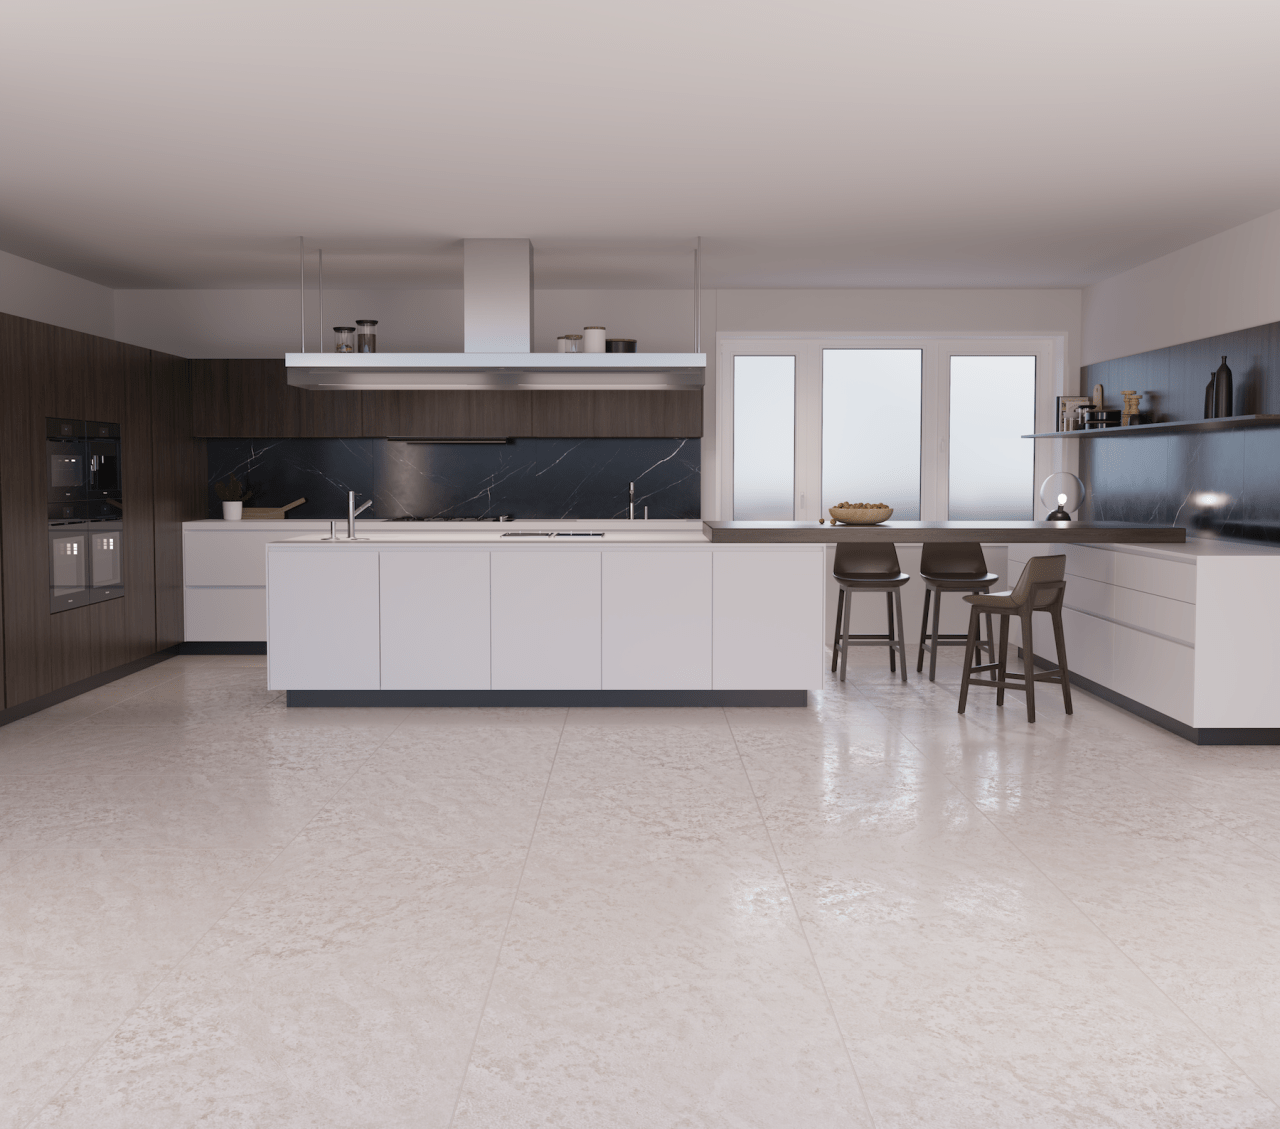 Ceramic tile flooring in a kitchen that has been digitally printed with a subtle pattern.